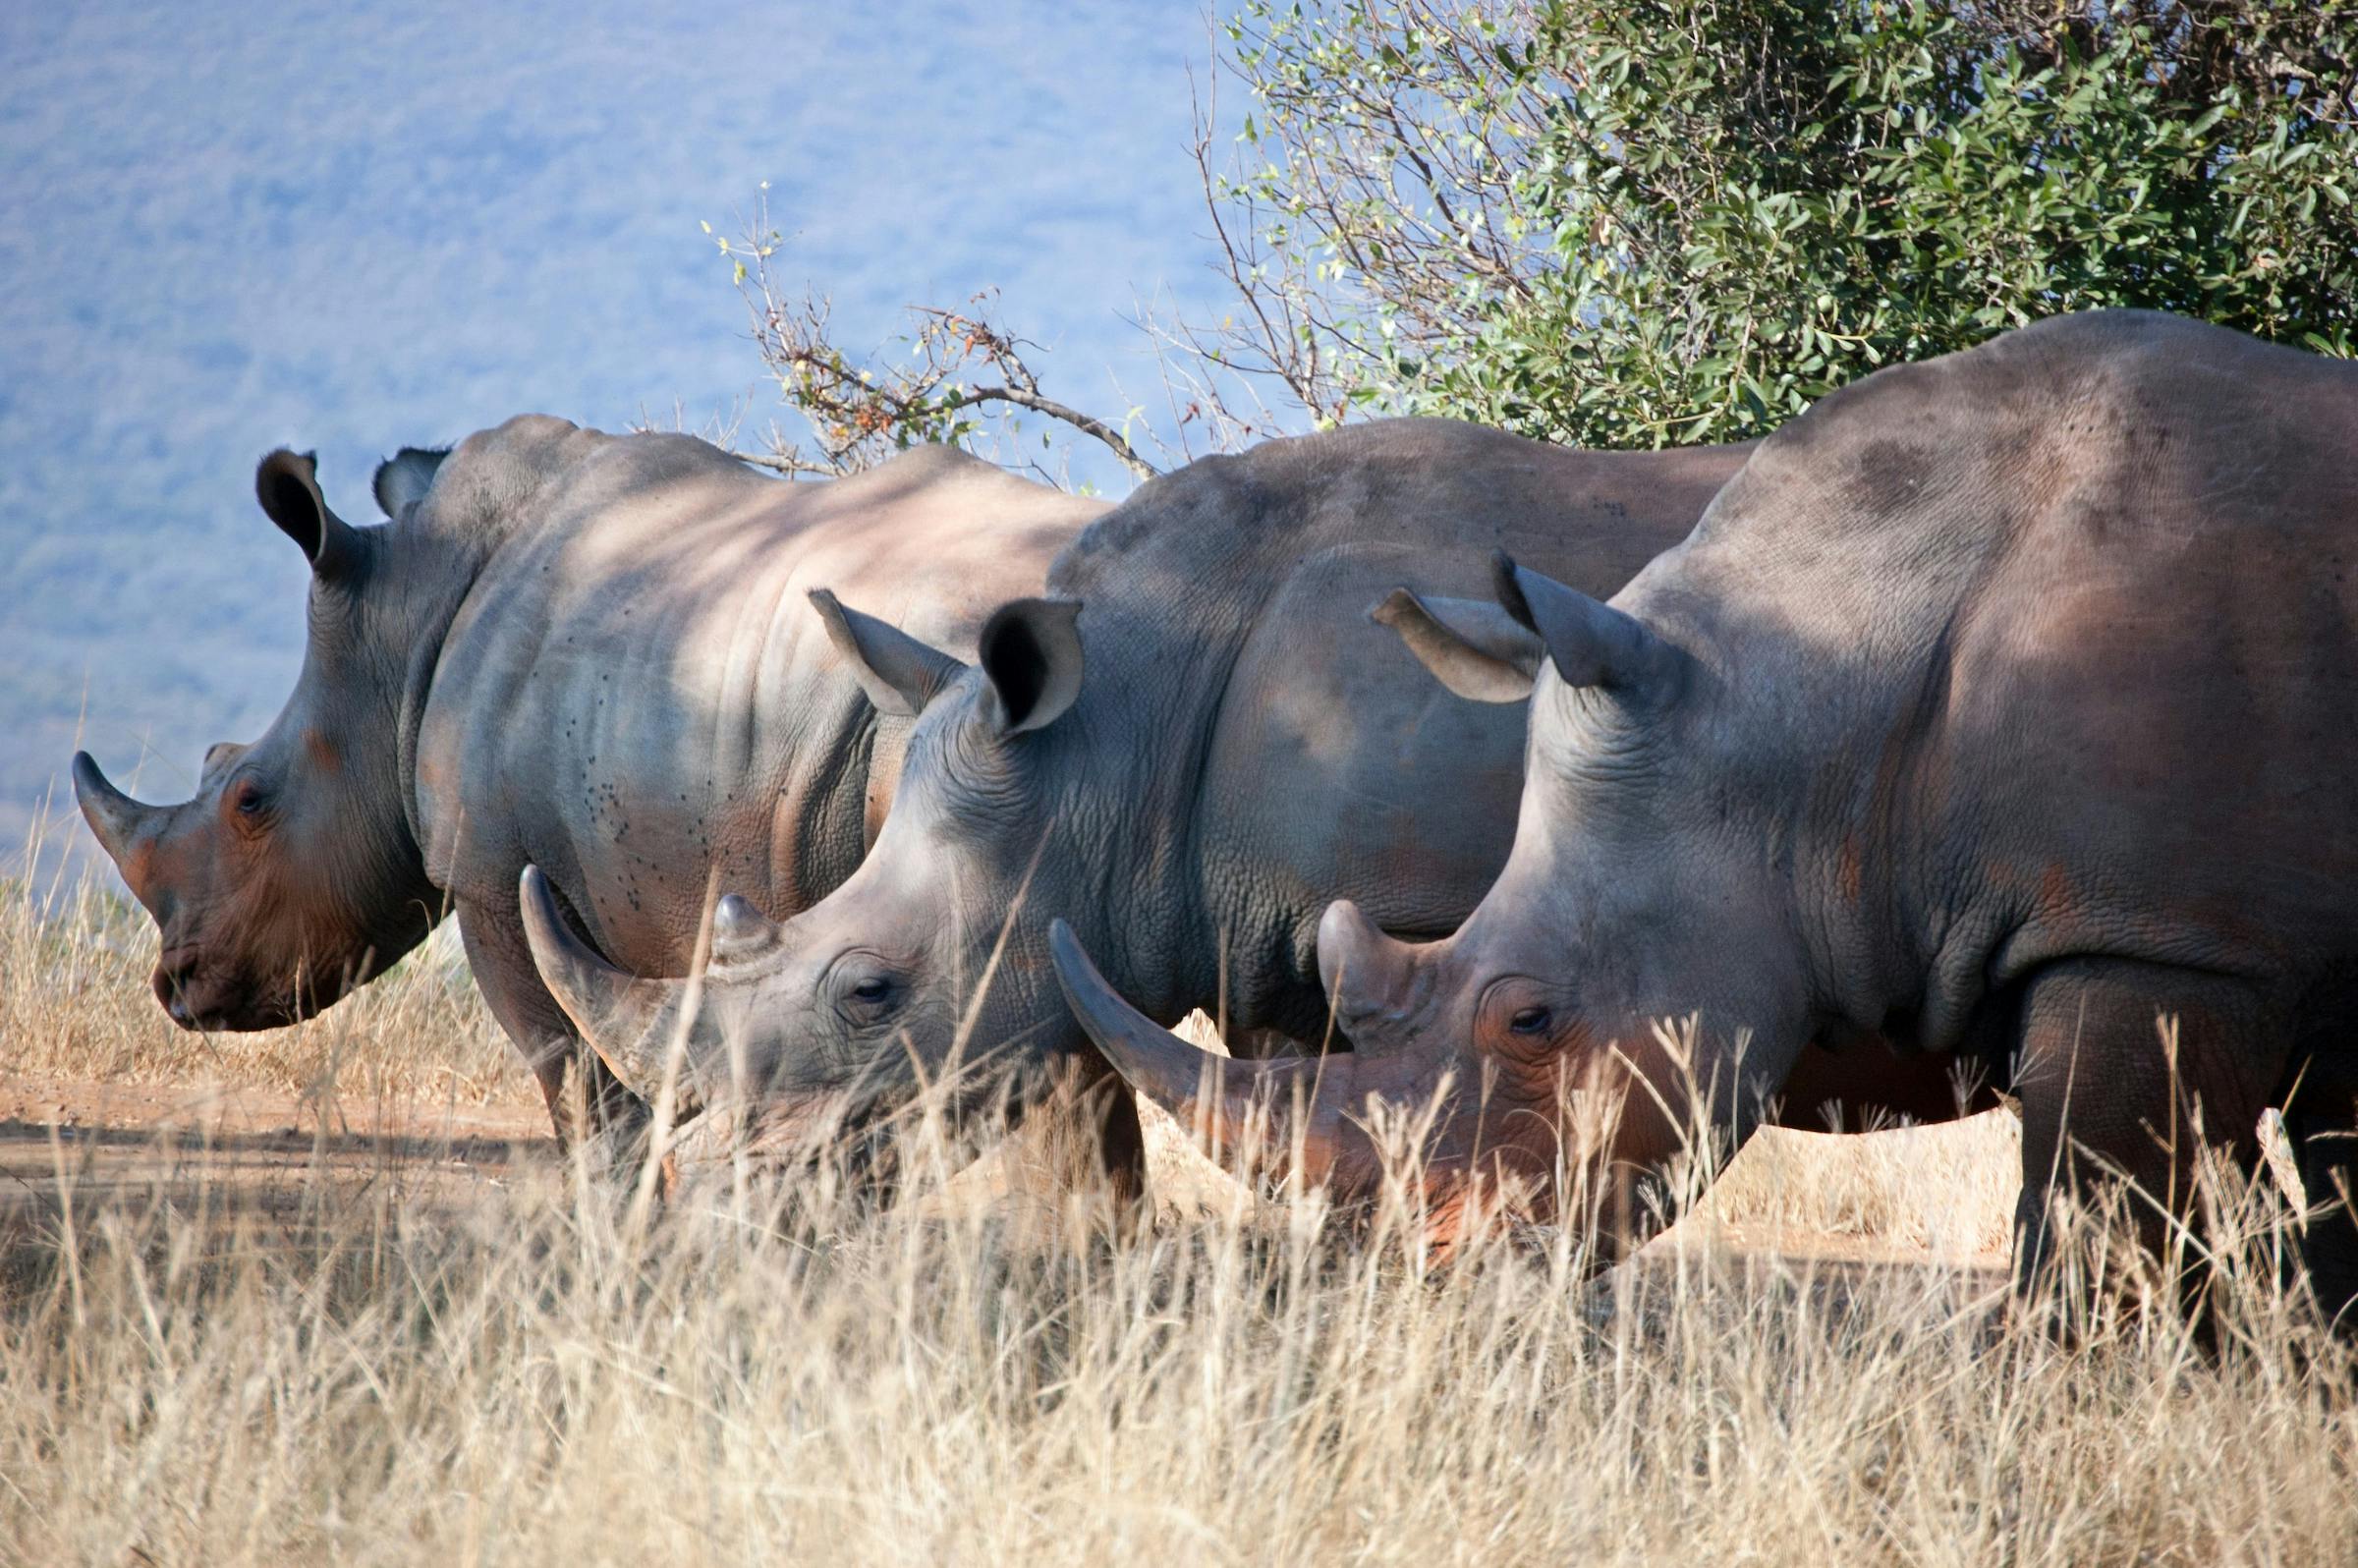 Data Shows South Africa's Private Parks are Better at Preventing Poaching